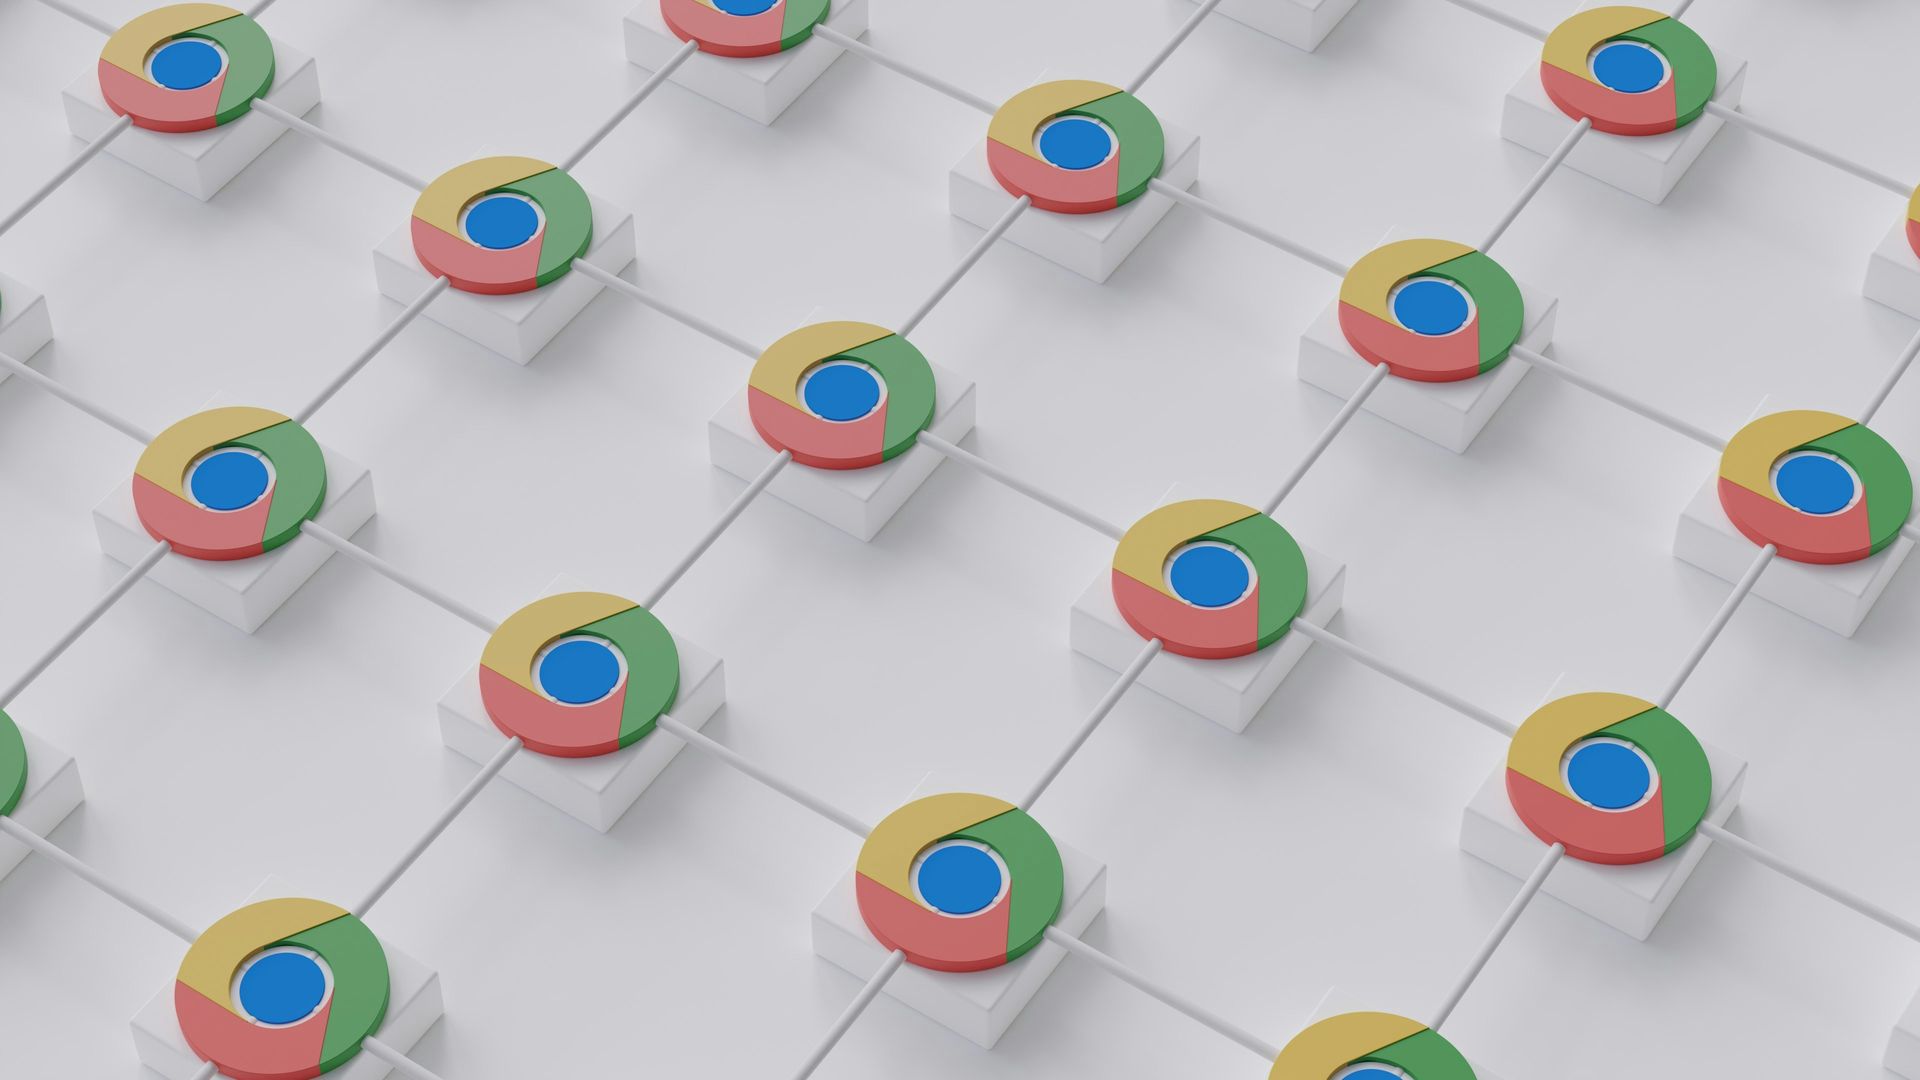 How to use Google Chrome's AI features?